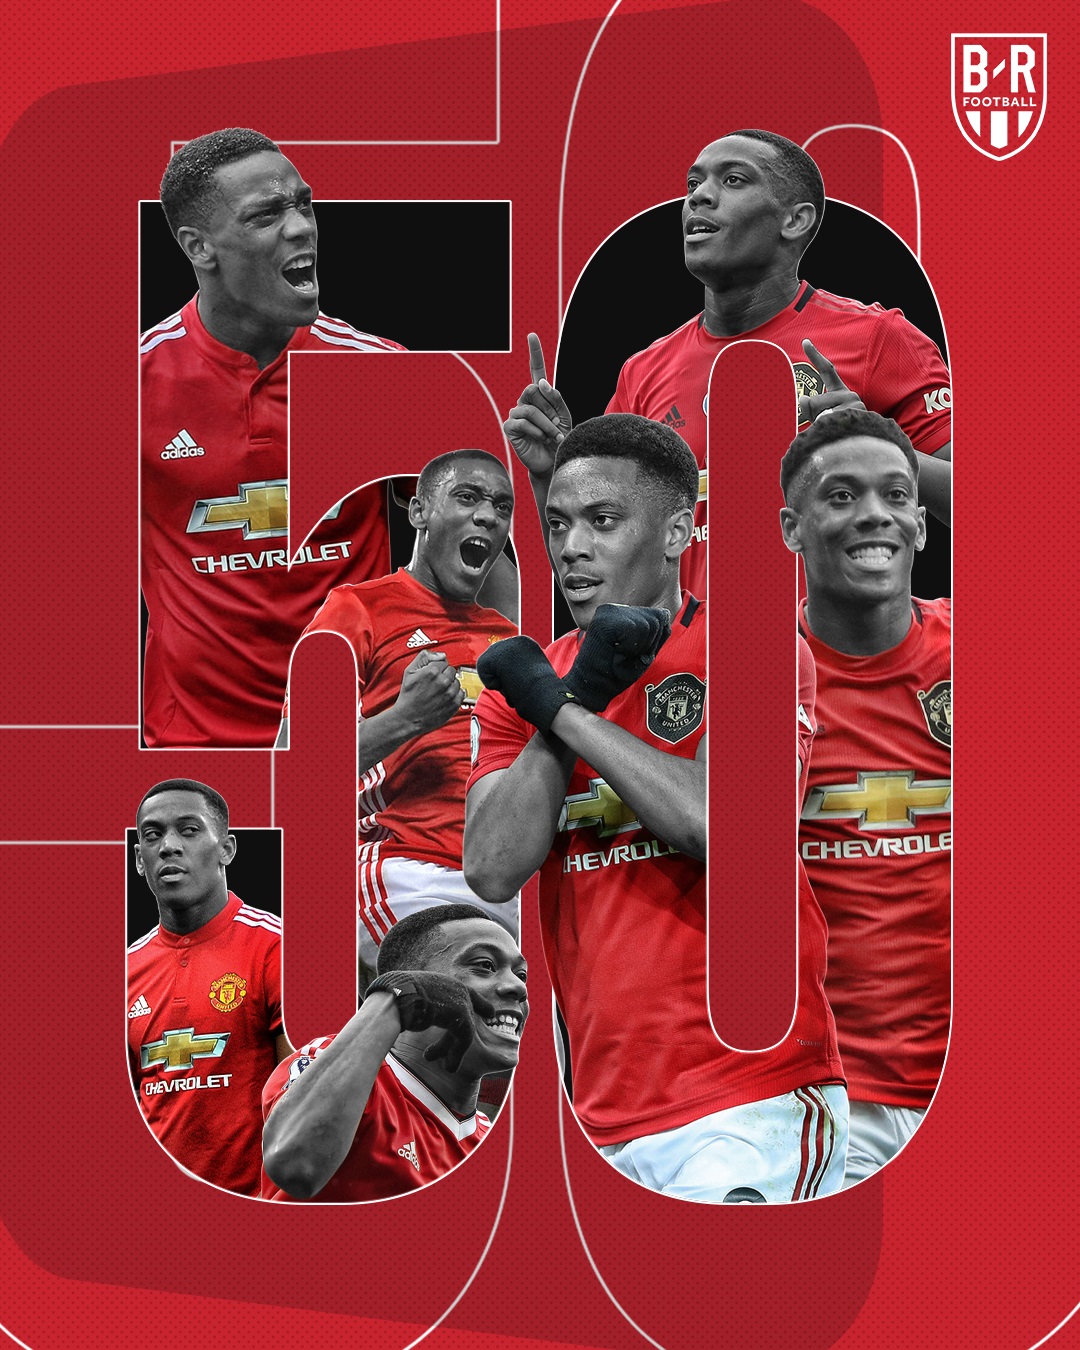 <a  data-cke-saved-href='/static/page/taxonomy/33080' href='/static/page/taxonomy/33080'>آنتونی مارسیال</a> - Anthony Martial